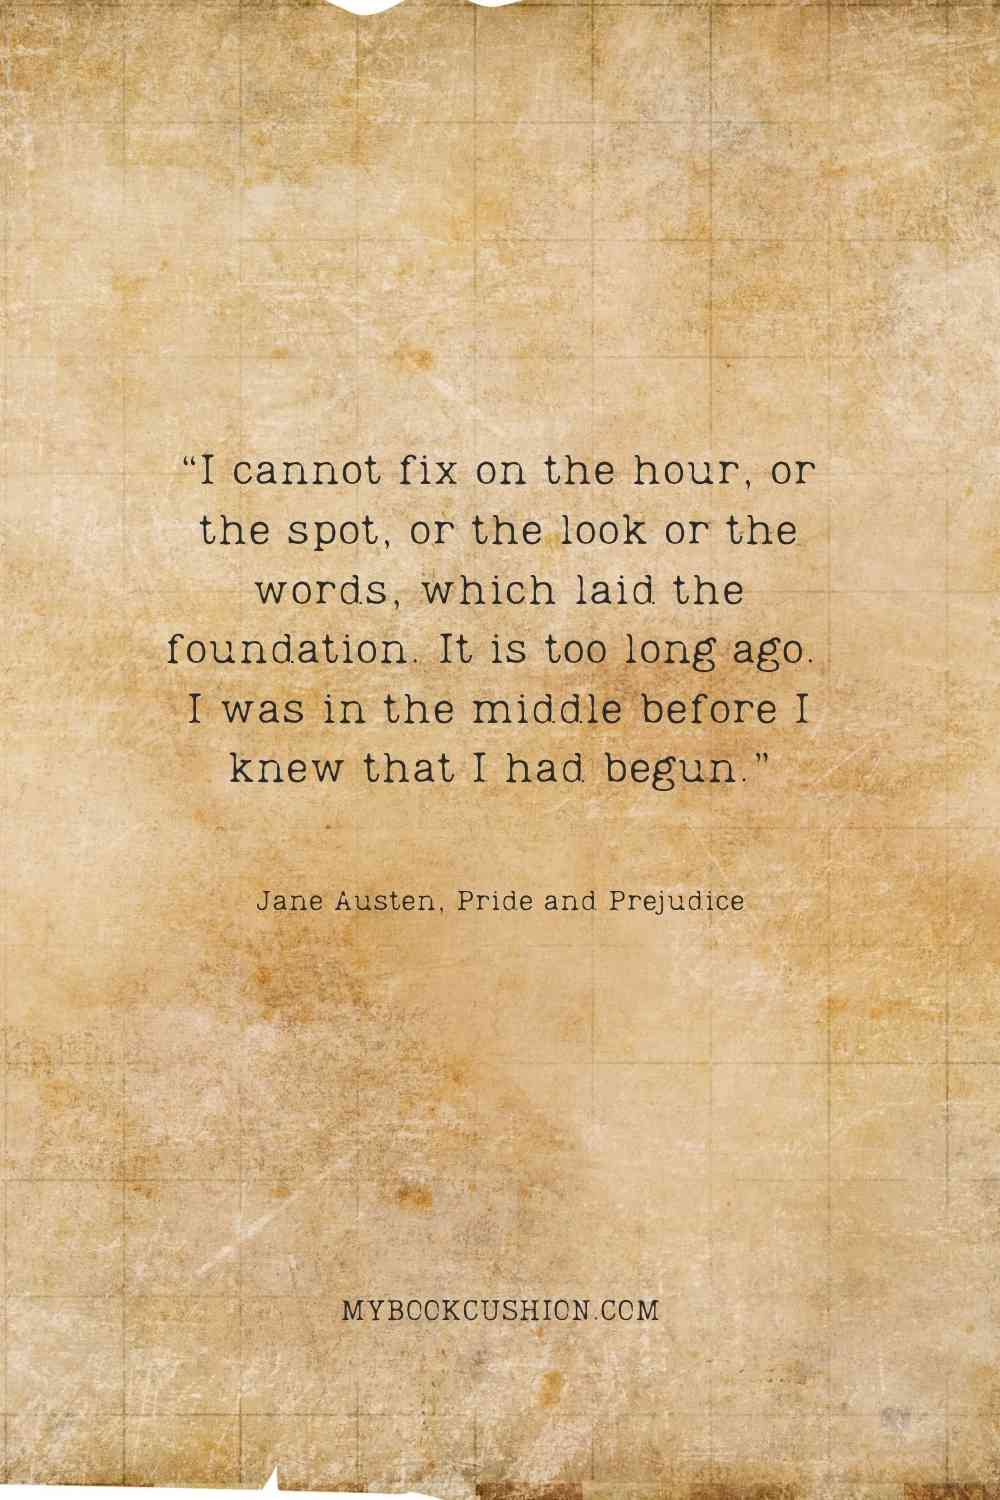 “I cannot fix on the hour, or the spot, or the look or the words, which laid the foundation. It is too long ago. I was in the middle before I knew that I had begun.” - Jane Austen, Pride and Prejudice